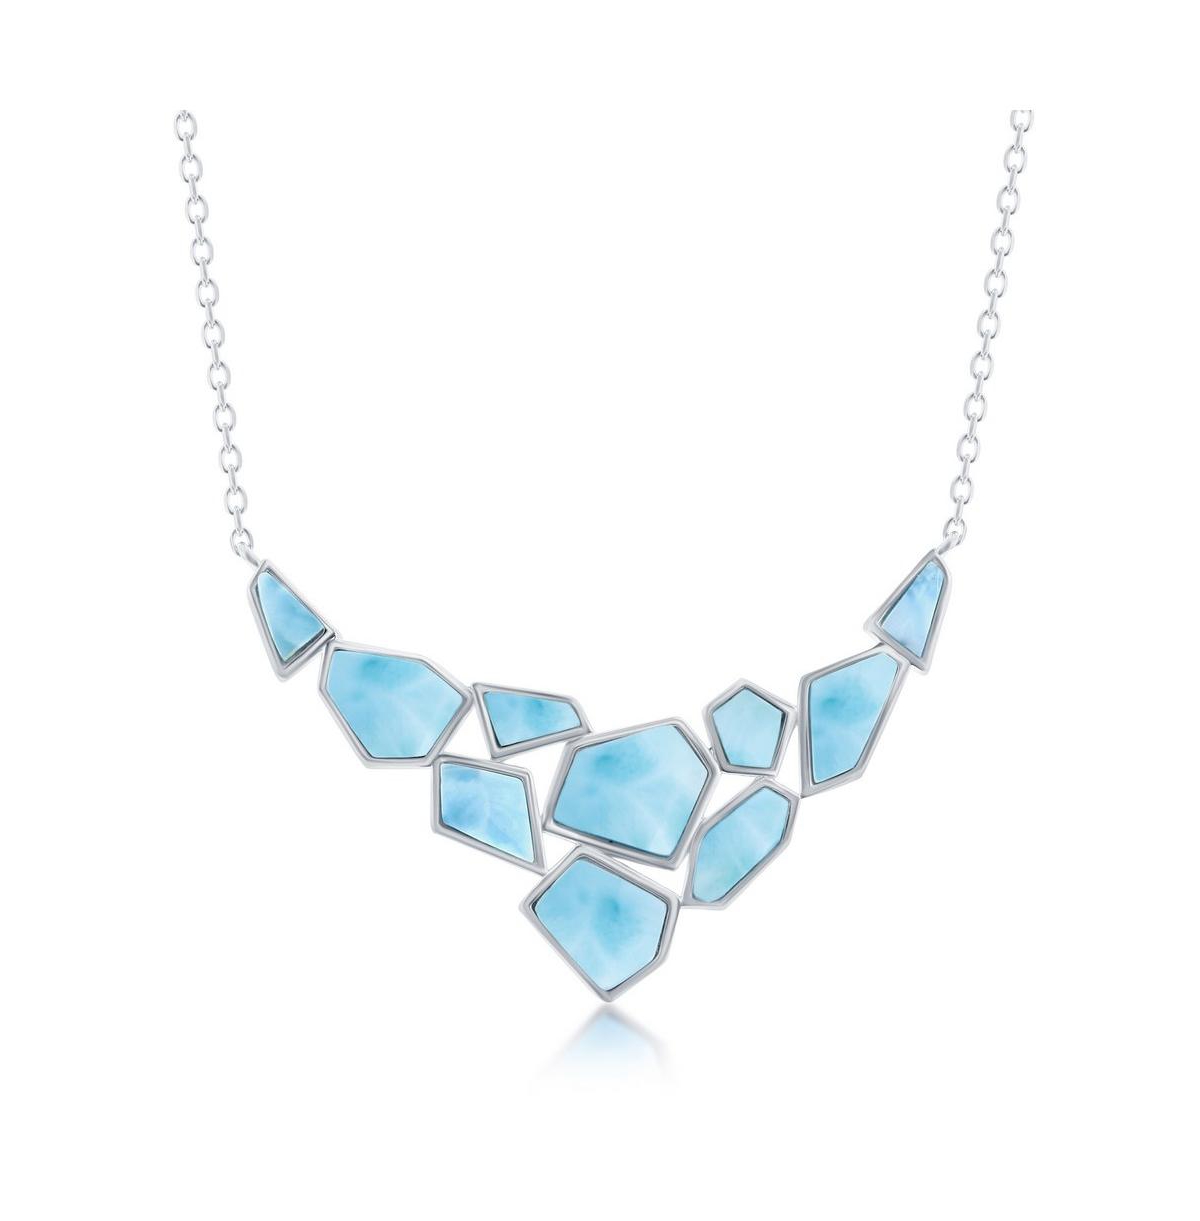 Sterling Silver Large Hexagon & Small Multi-Shaped Larimar Necklace - Blue